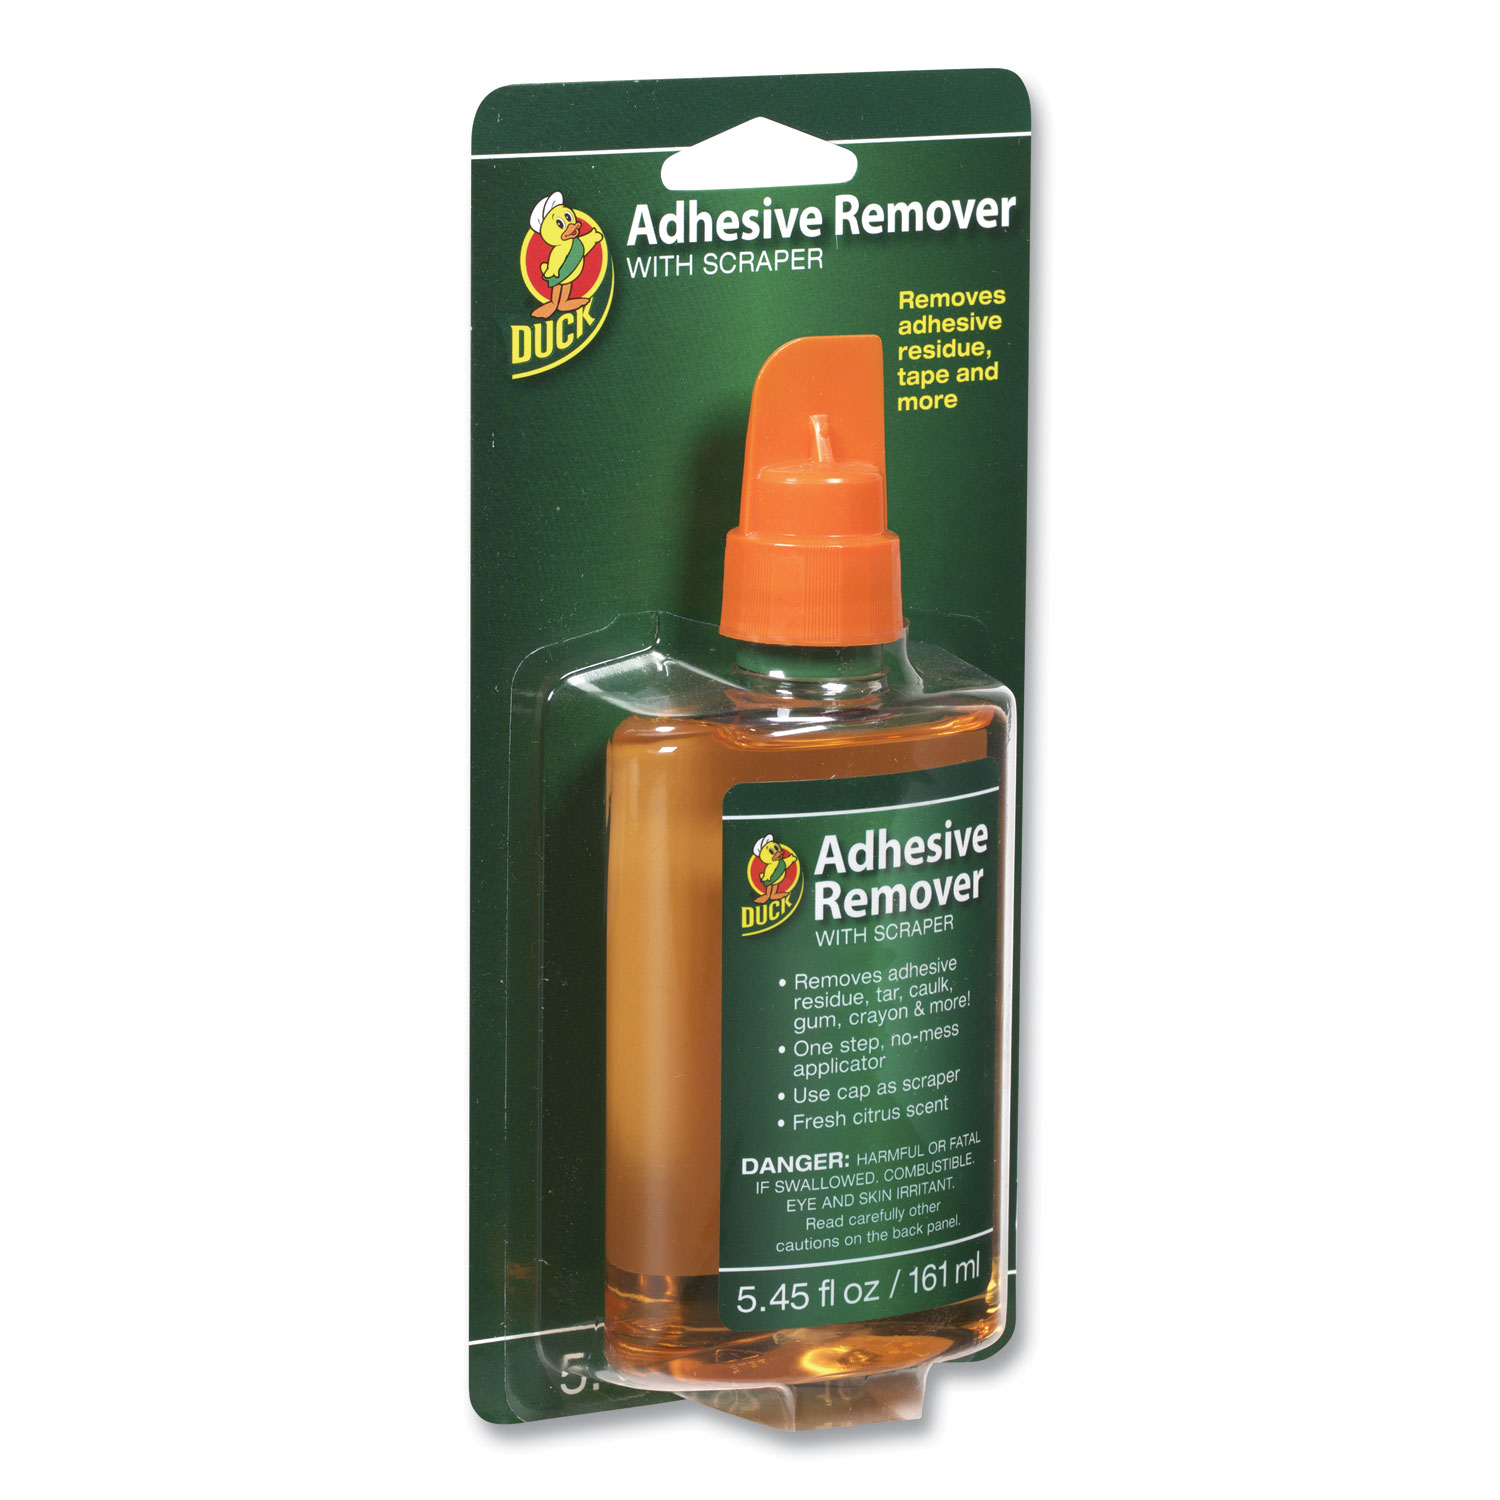  Duck 00-01560-01 Adhesive Remover, 5.45 oz Spray Bottle (DUC000156001) 